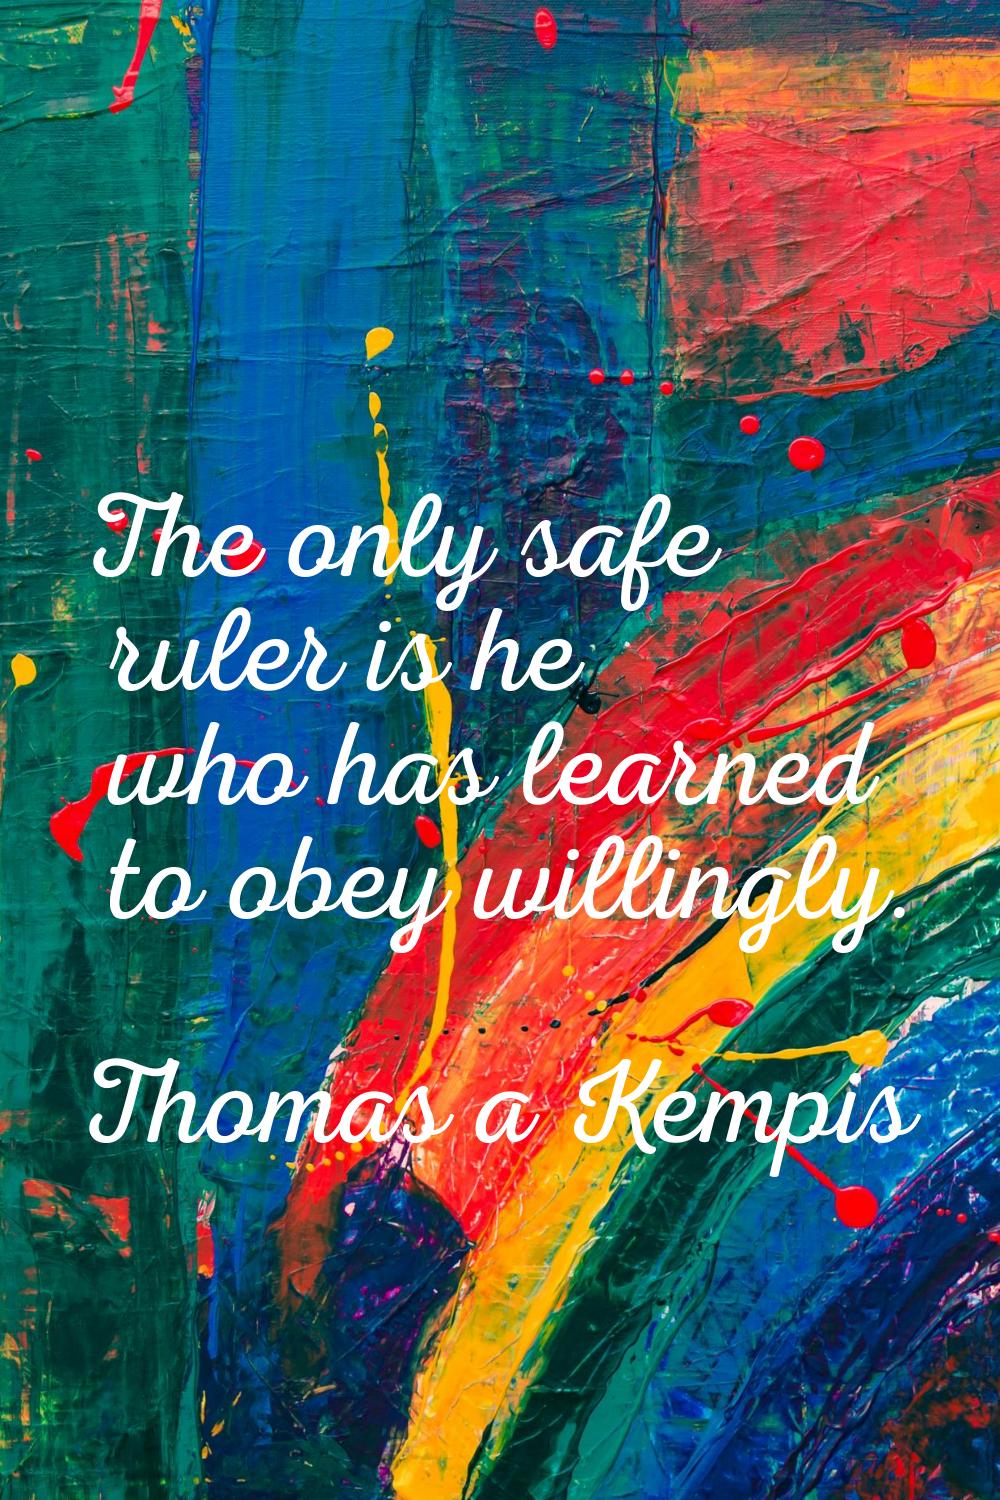 The only safe ruler is he who has learned to obey willingly.